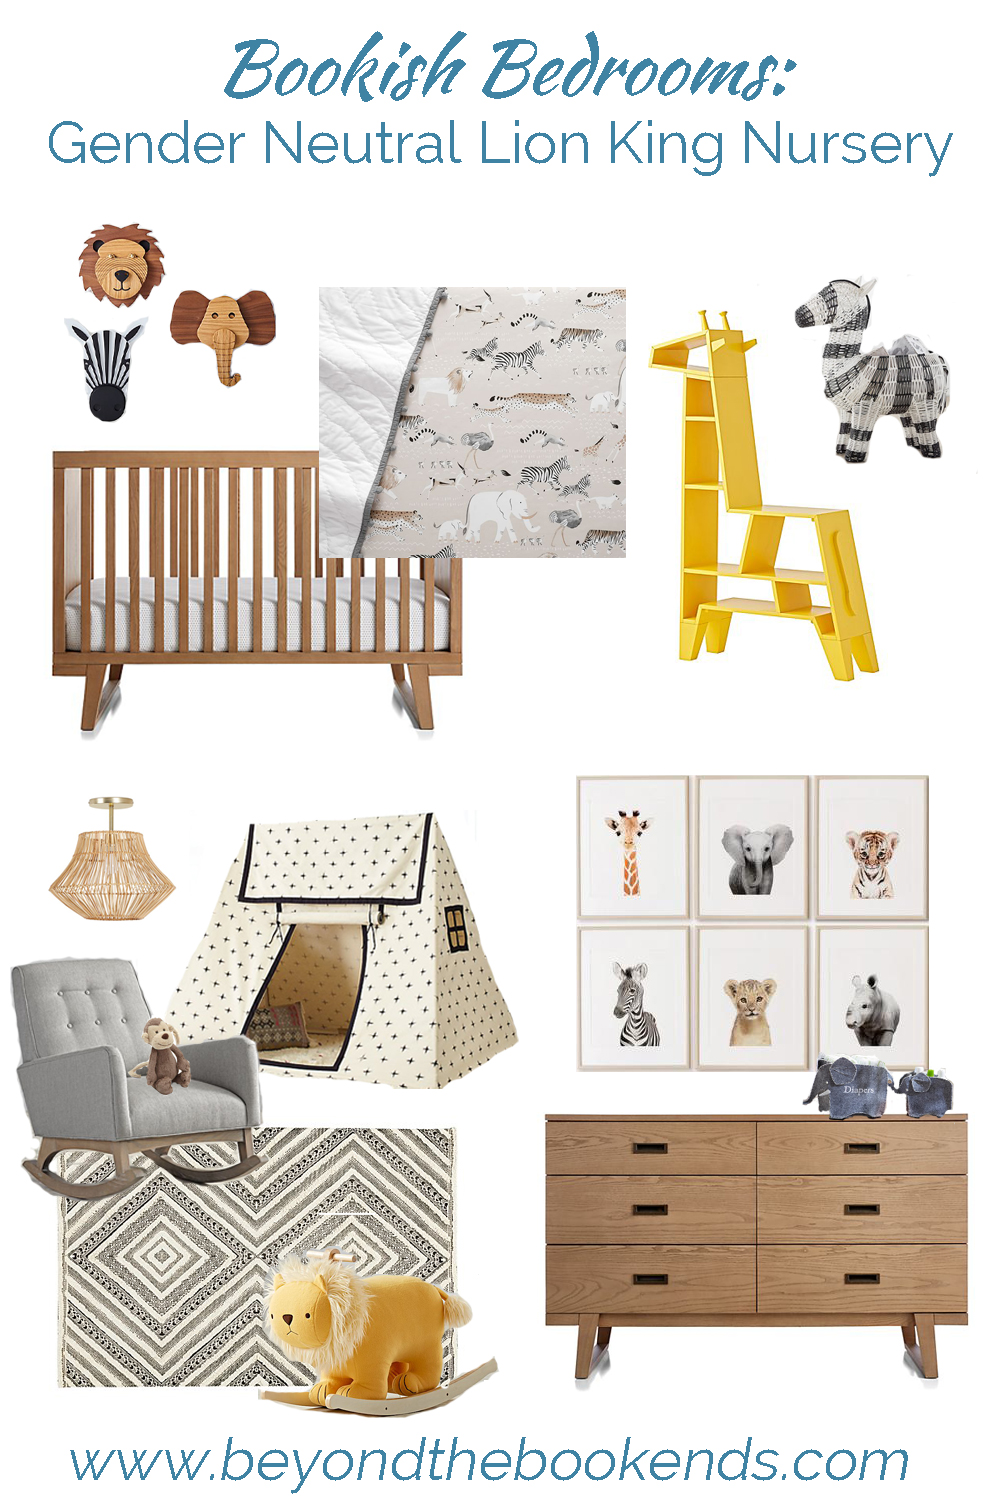 The perfect gender neutral Lion King nursery for your little lion cub. Soft palette, baby animals, and the cutest zebra storage basket around are all featured in this nursery.